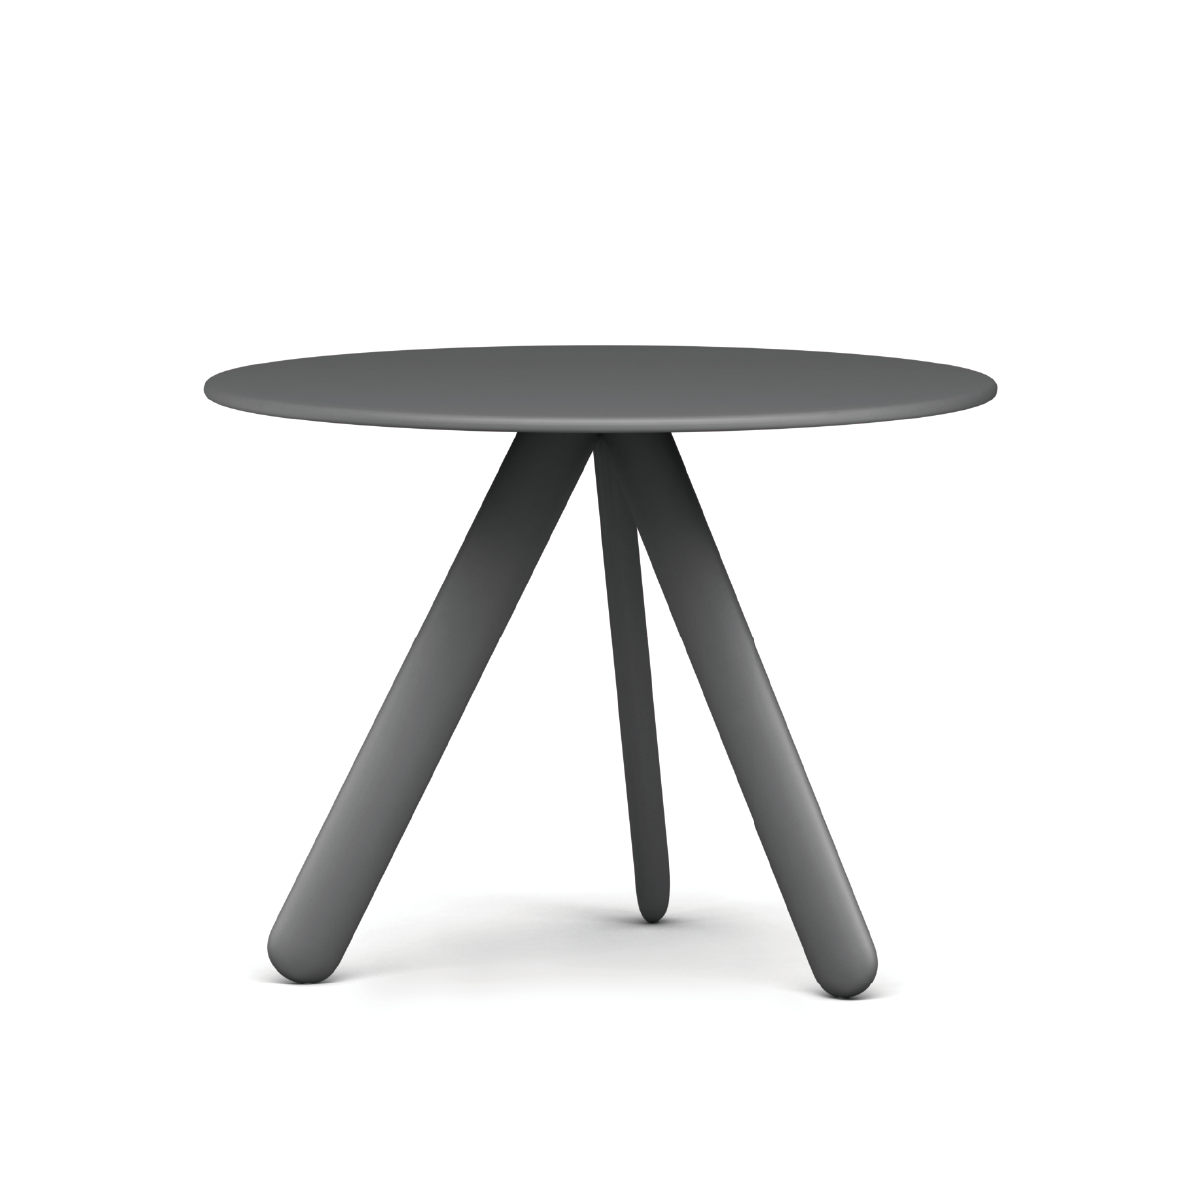 DT03  Table from ¥2,899